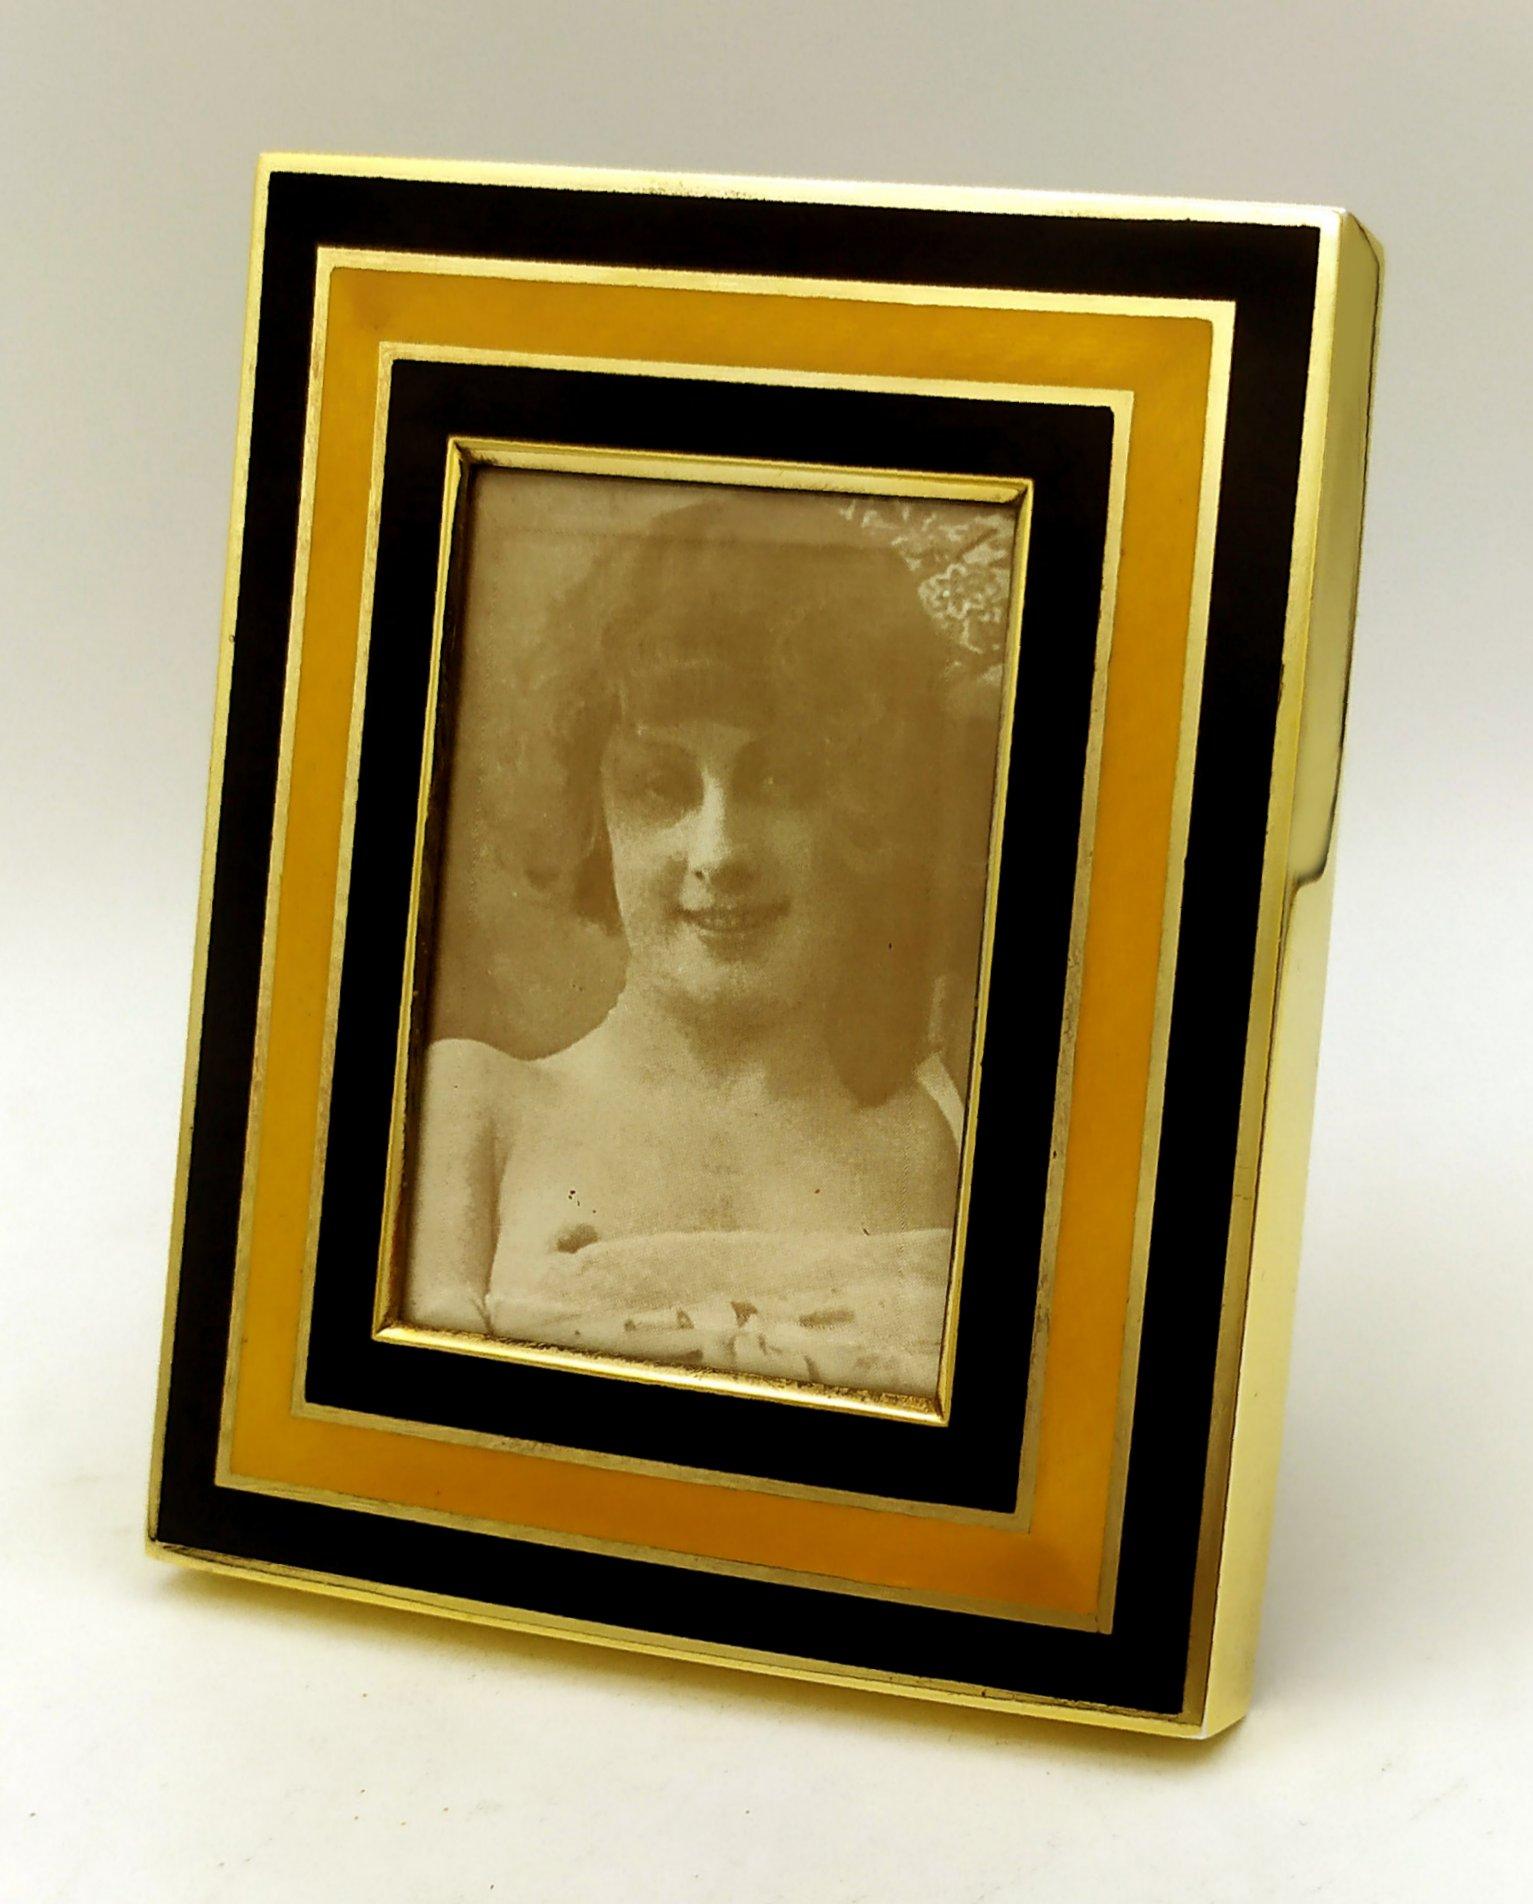 Rectangular photo frame in gold plated 925/1000 sterling silver with translucent fired enamels on two-tone striped guillochè. In a contemporary style. Ground glass and velvet panel. External measurements cm. 10 x 12. internal cm. 5 x 7. Weight gr.